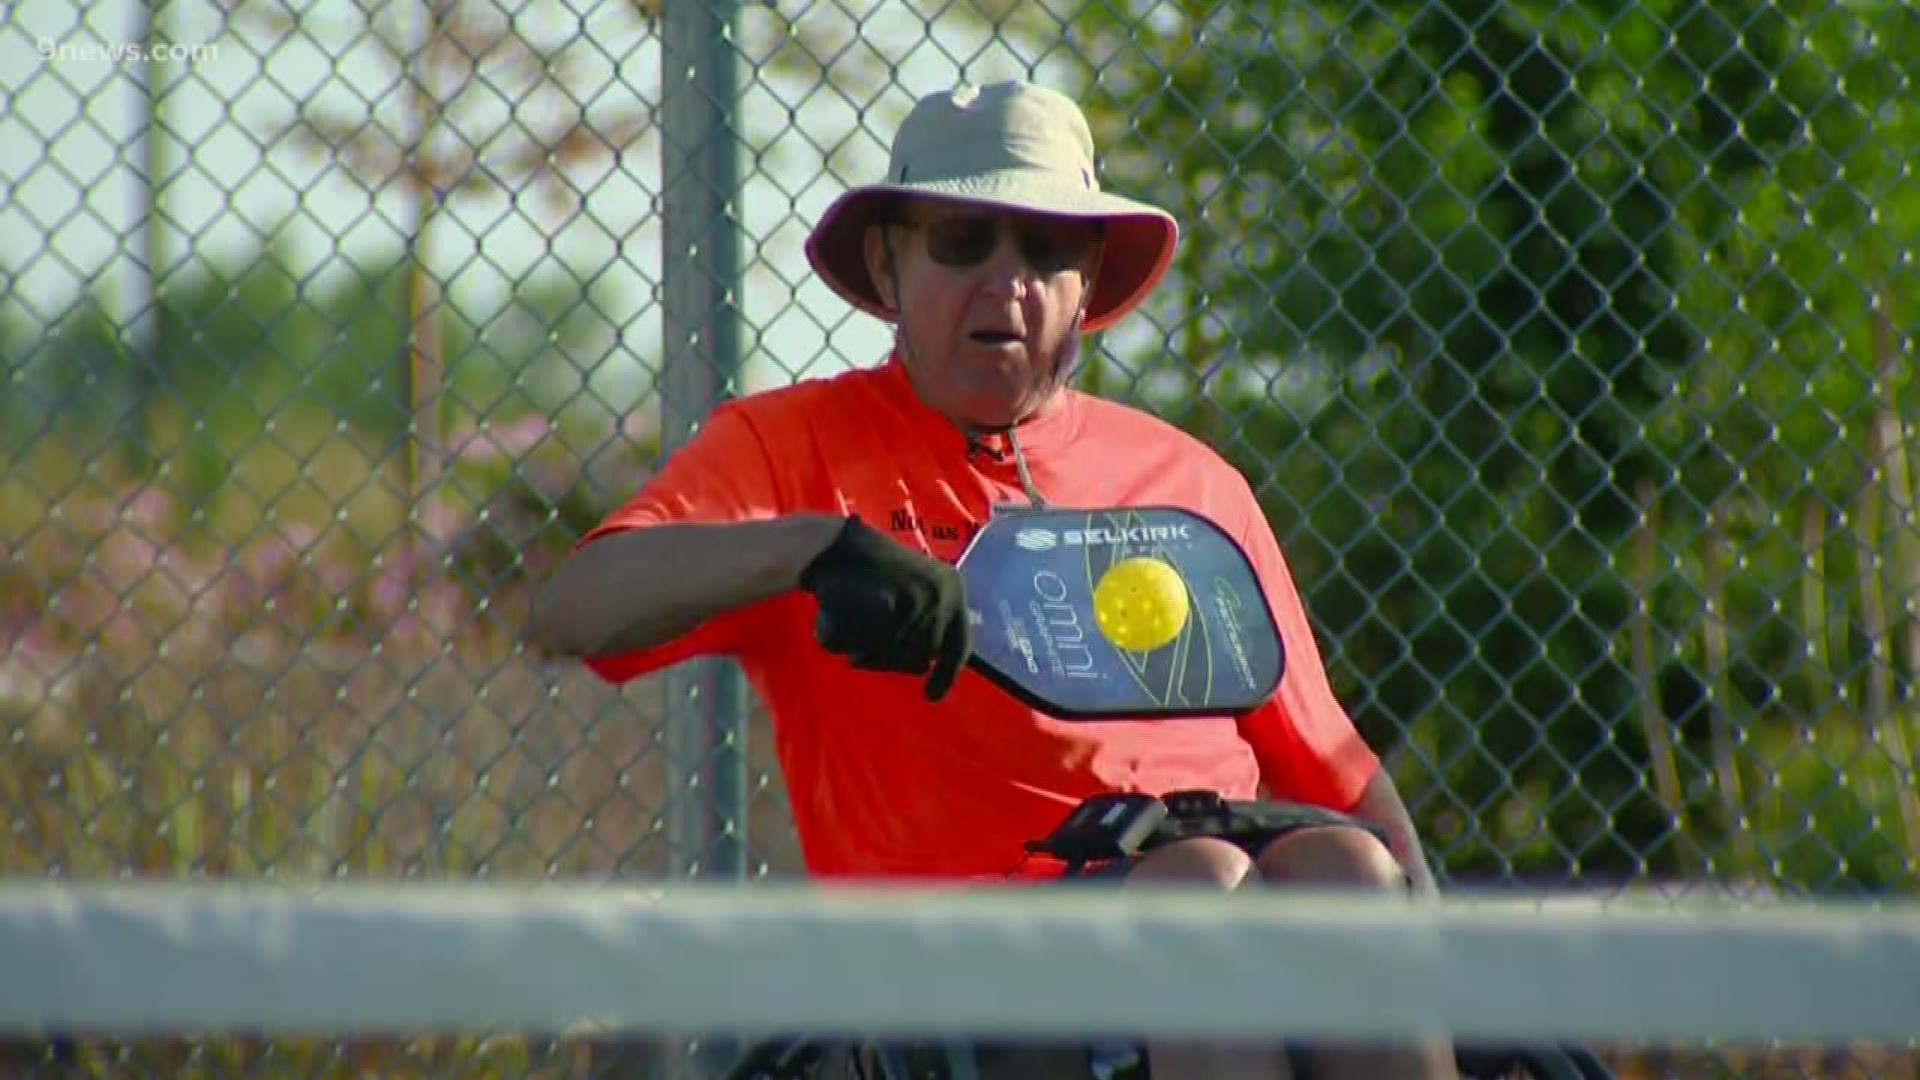 'It’s (a) very social game and you become addicted, not necessarily to pickleball but to the people you get to play with, and I think that’s the biggest attraction.'